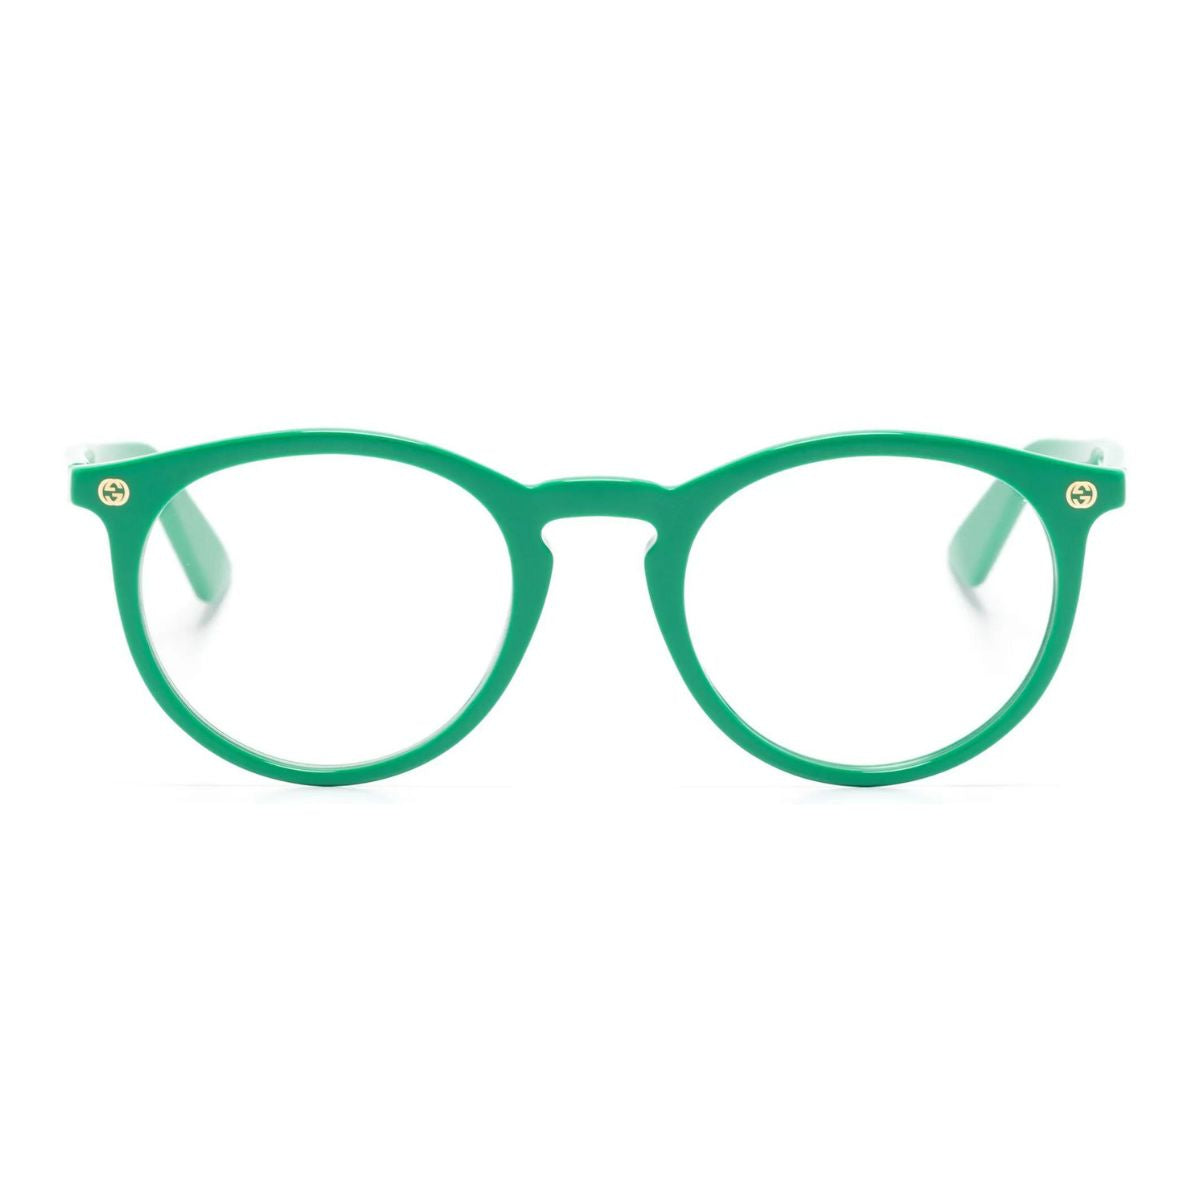 "buy Gucci GG0121O 008 round shape eyeglasses frame for men and women at optorium"